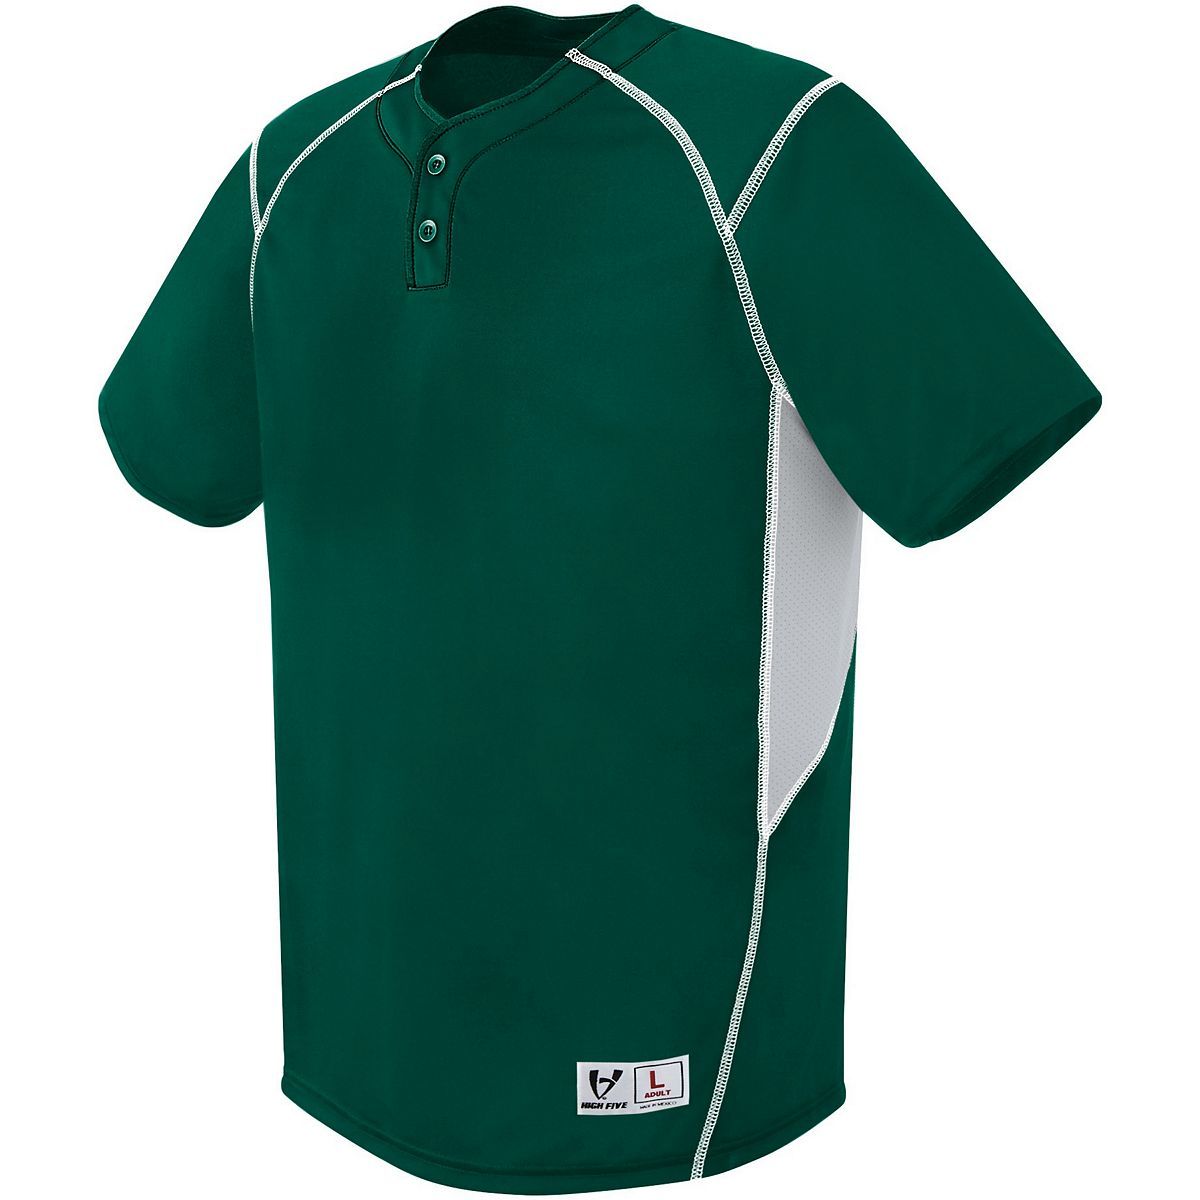 Augusta Sportswear Bandit Two-Button Jersey in Forest/Silver Grey/White  -Part of the Adult, Adult-Jersey, Augusta-Products, Baseball, Shirts, All-Sports, All-Sports-1 product lines at KanaleyCreations.com